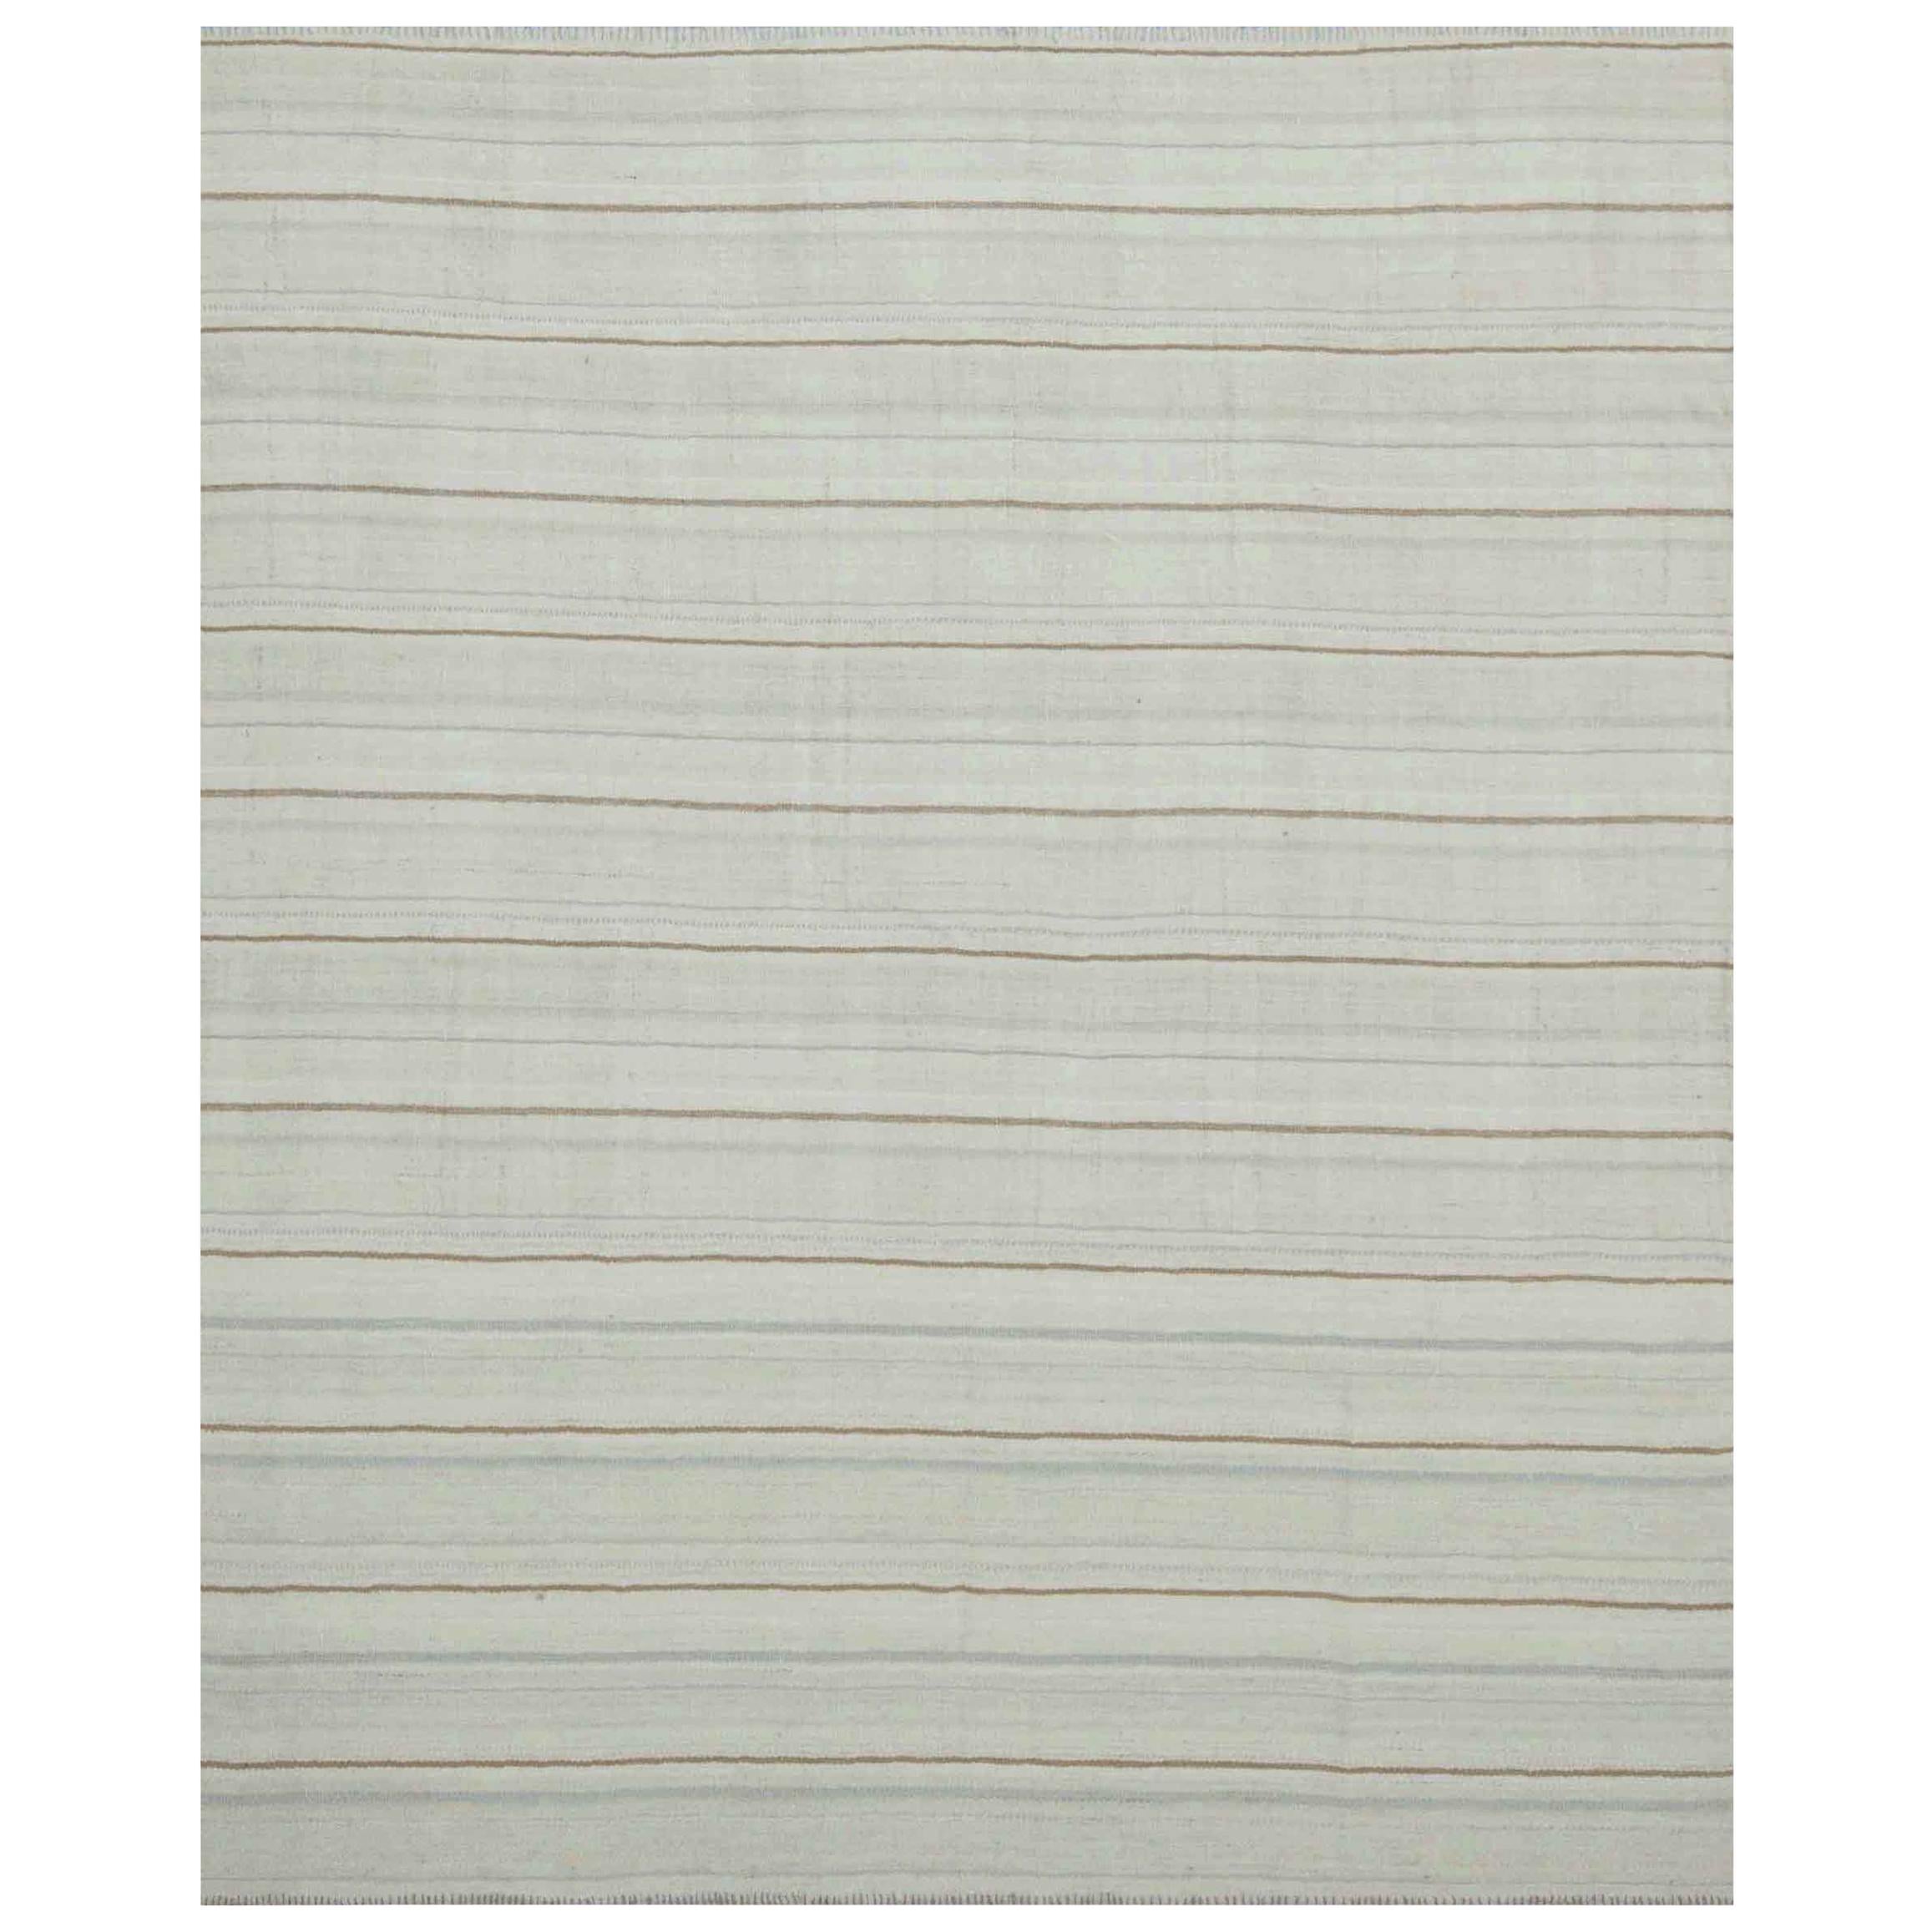 Modern Flat-Weave Kilim Rug in Ivory with Brown, White & Gray Stripes